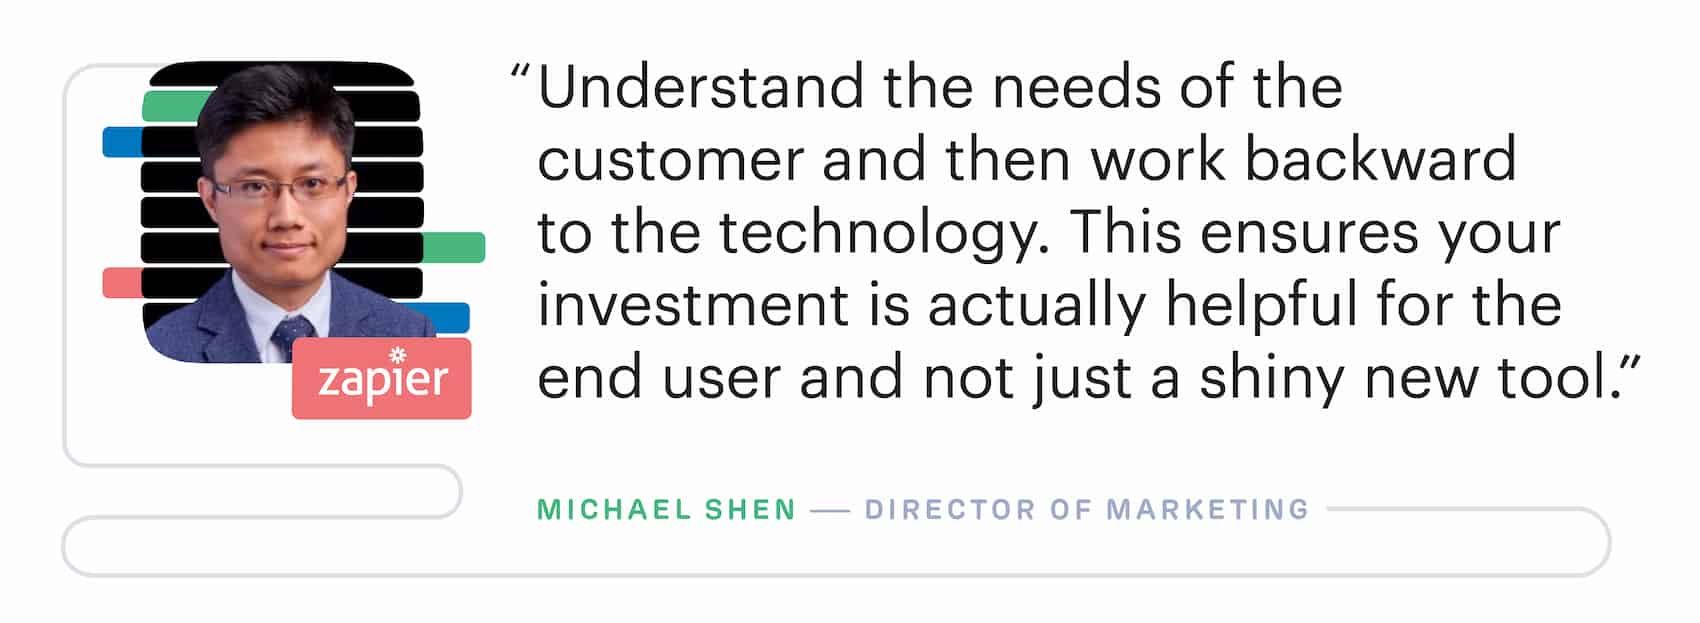 "Understand the needs of the customer and then work backward to the marketing technology. This ensures your investment is actually helpful for the end user and not just a shiny new tool." – Michael Shen, Director of Marketing at Zapier